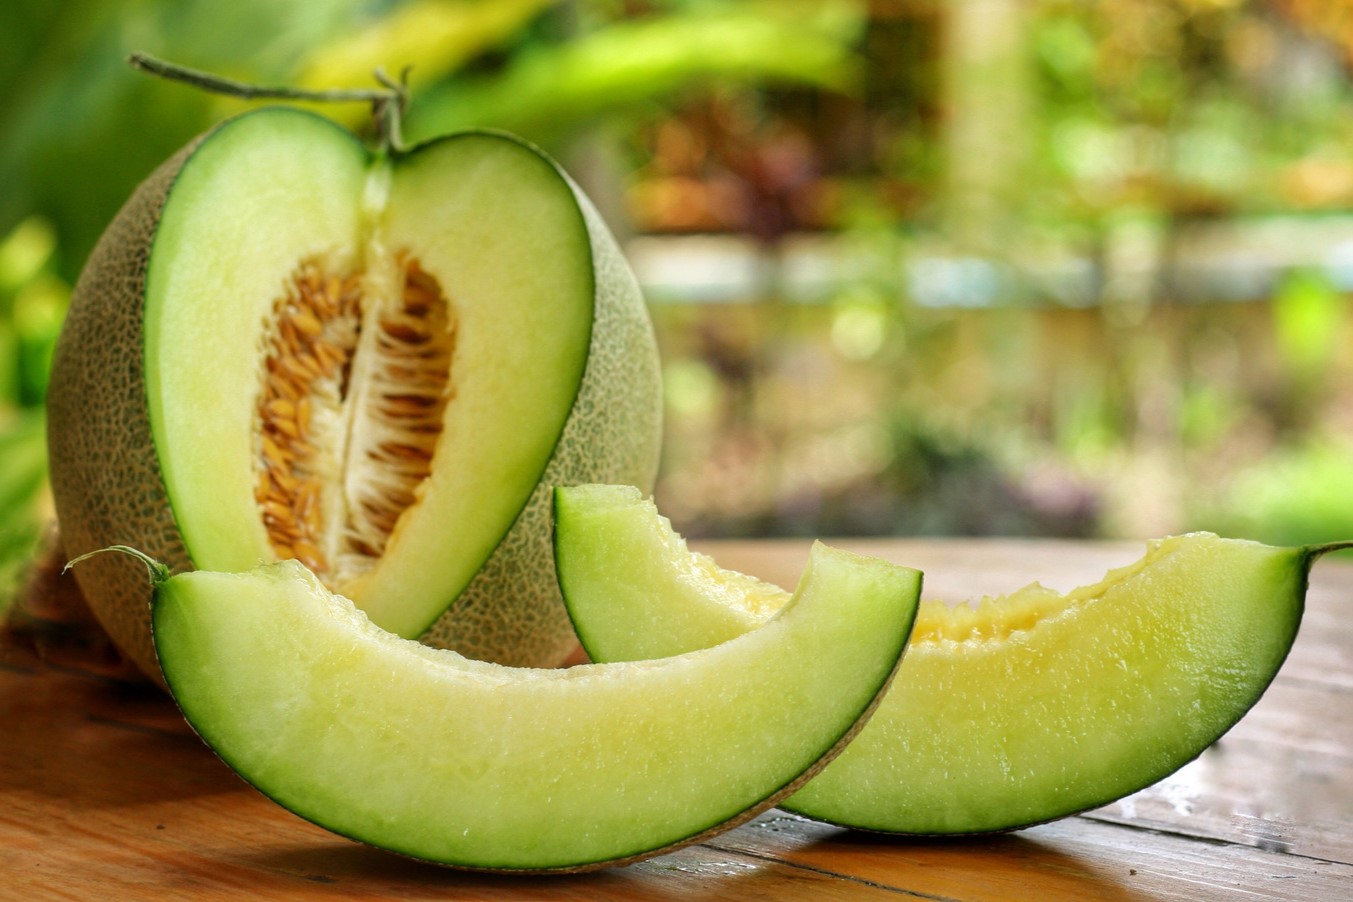 How To Tell If A Honeydew Is Ripe